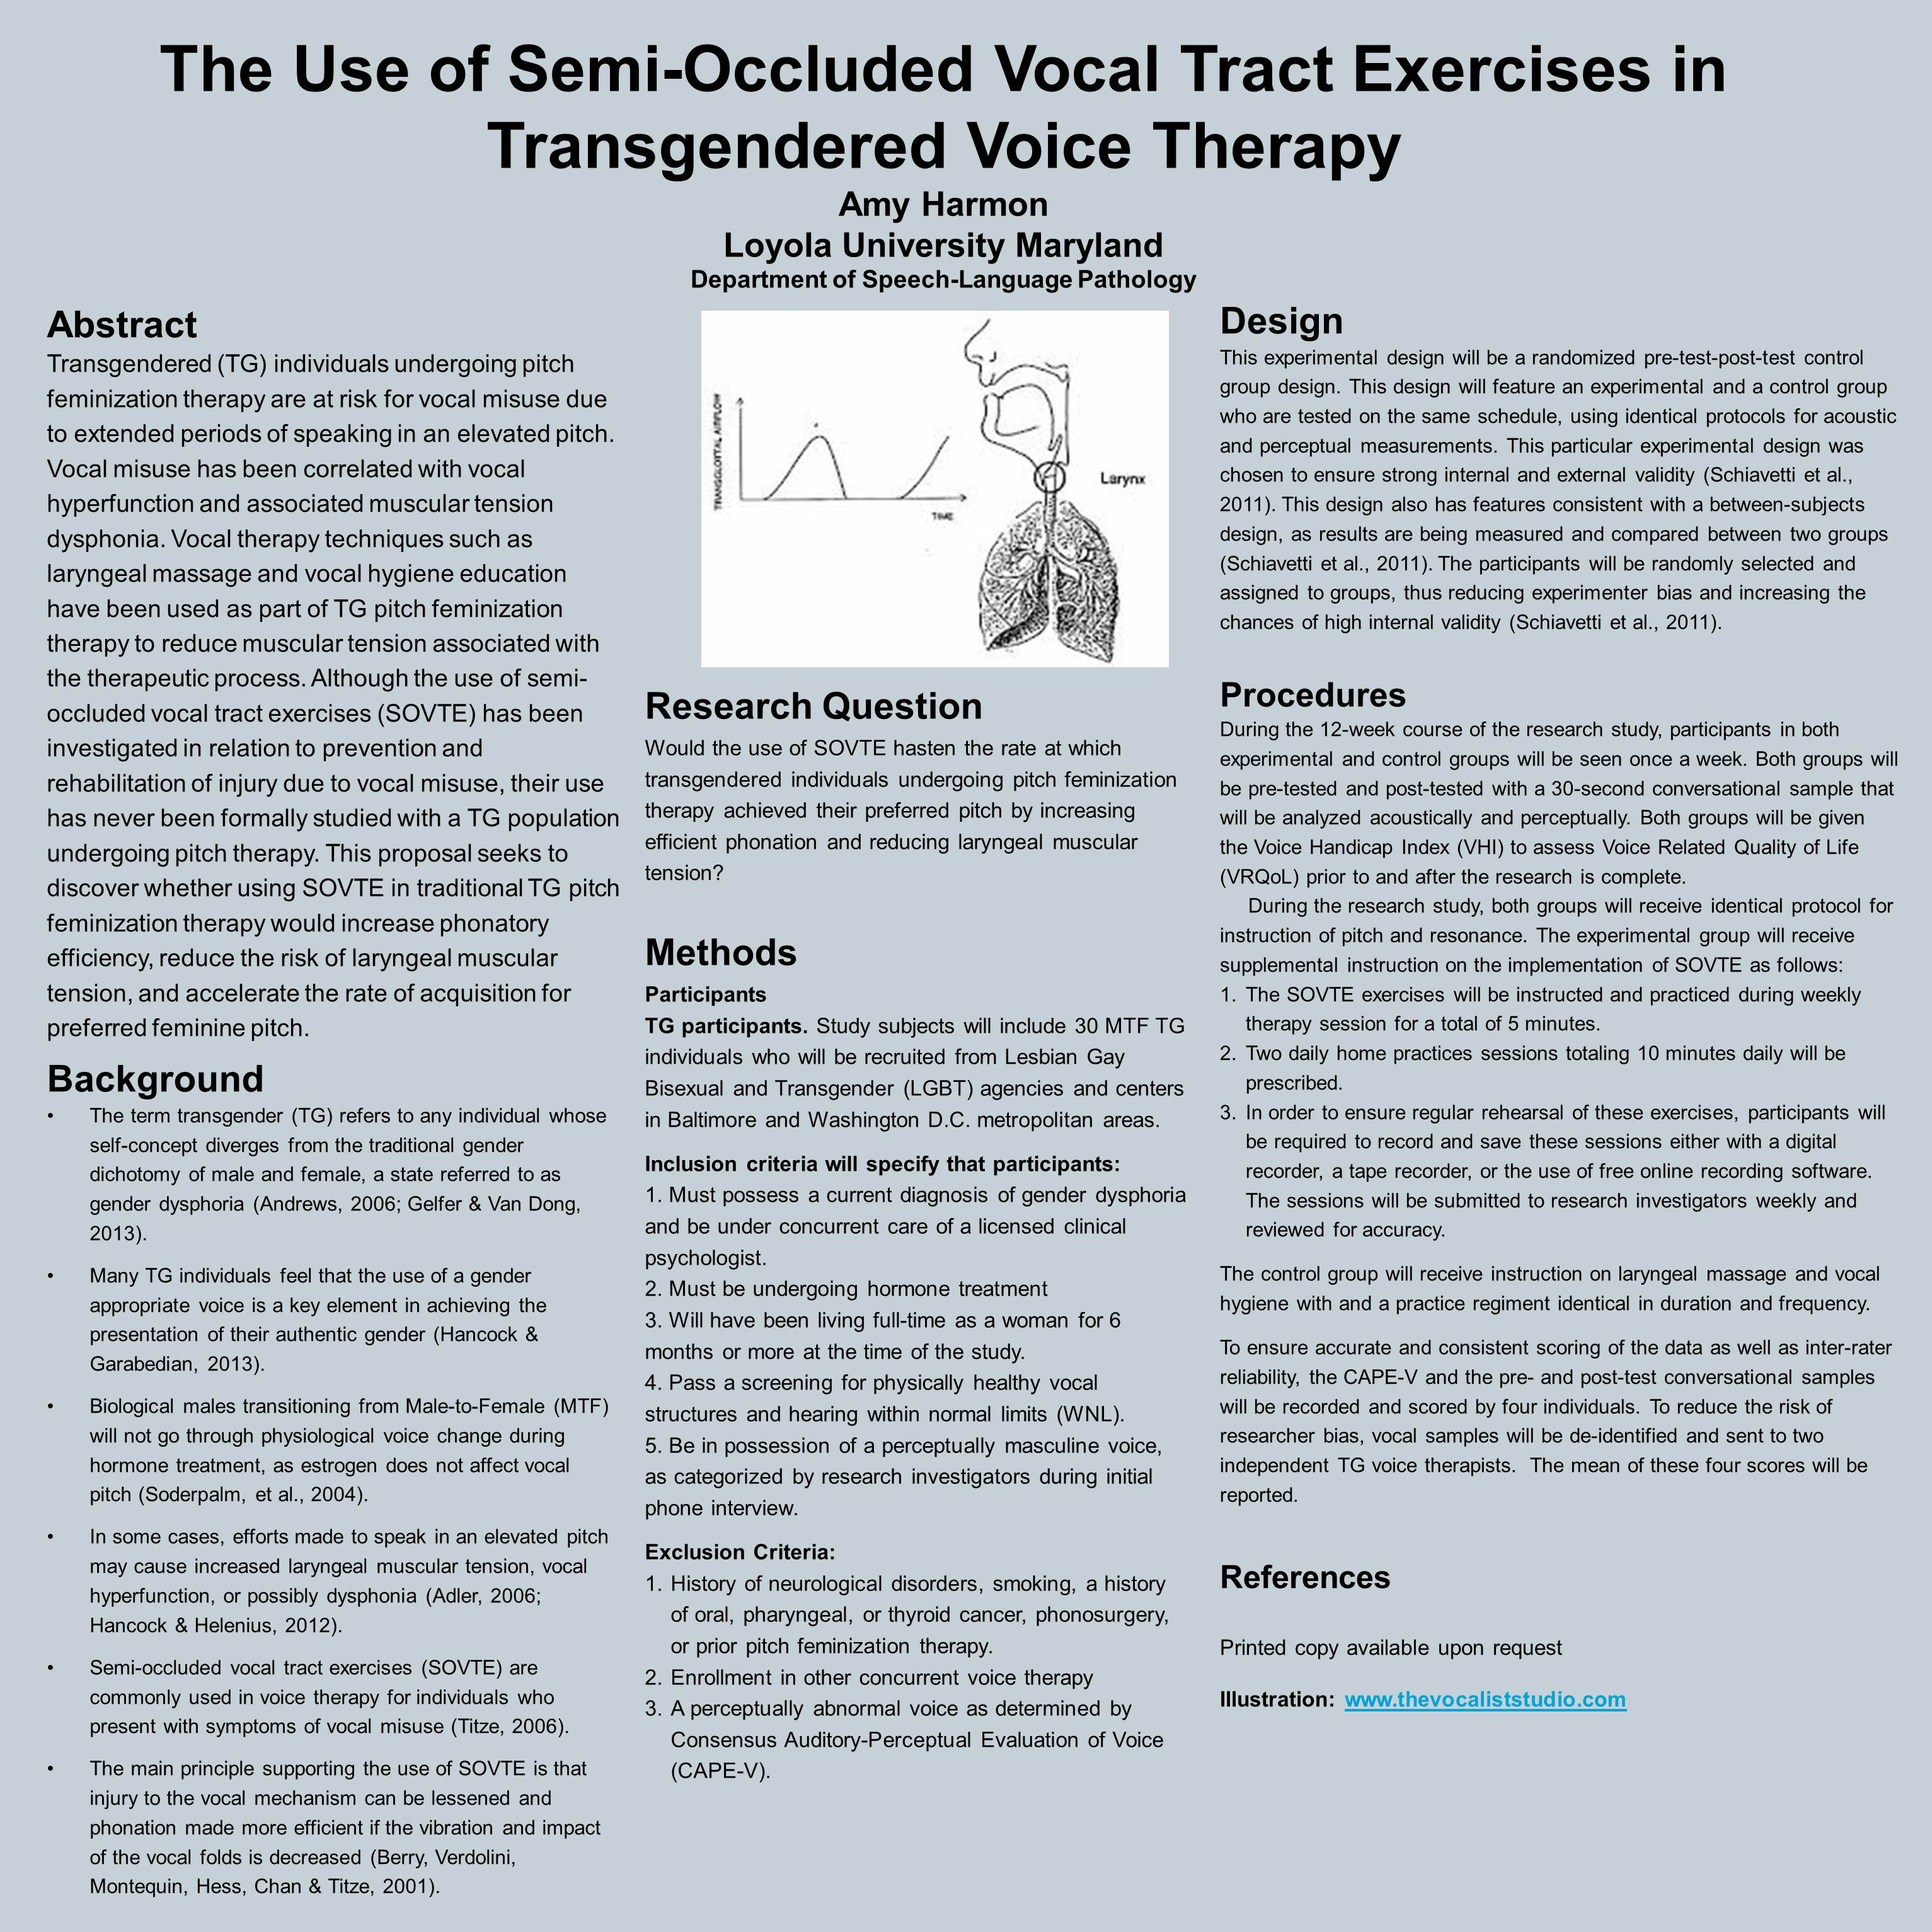 poster image: The Use of Semi-Occluded Vocal Tract Exercises in Transgendered Voice Therapy'